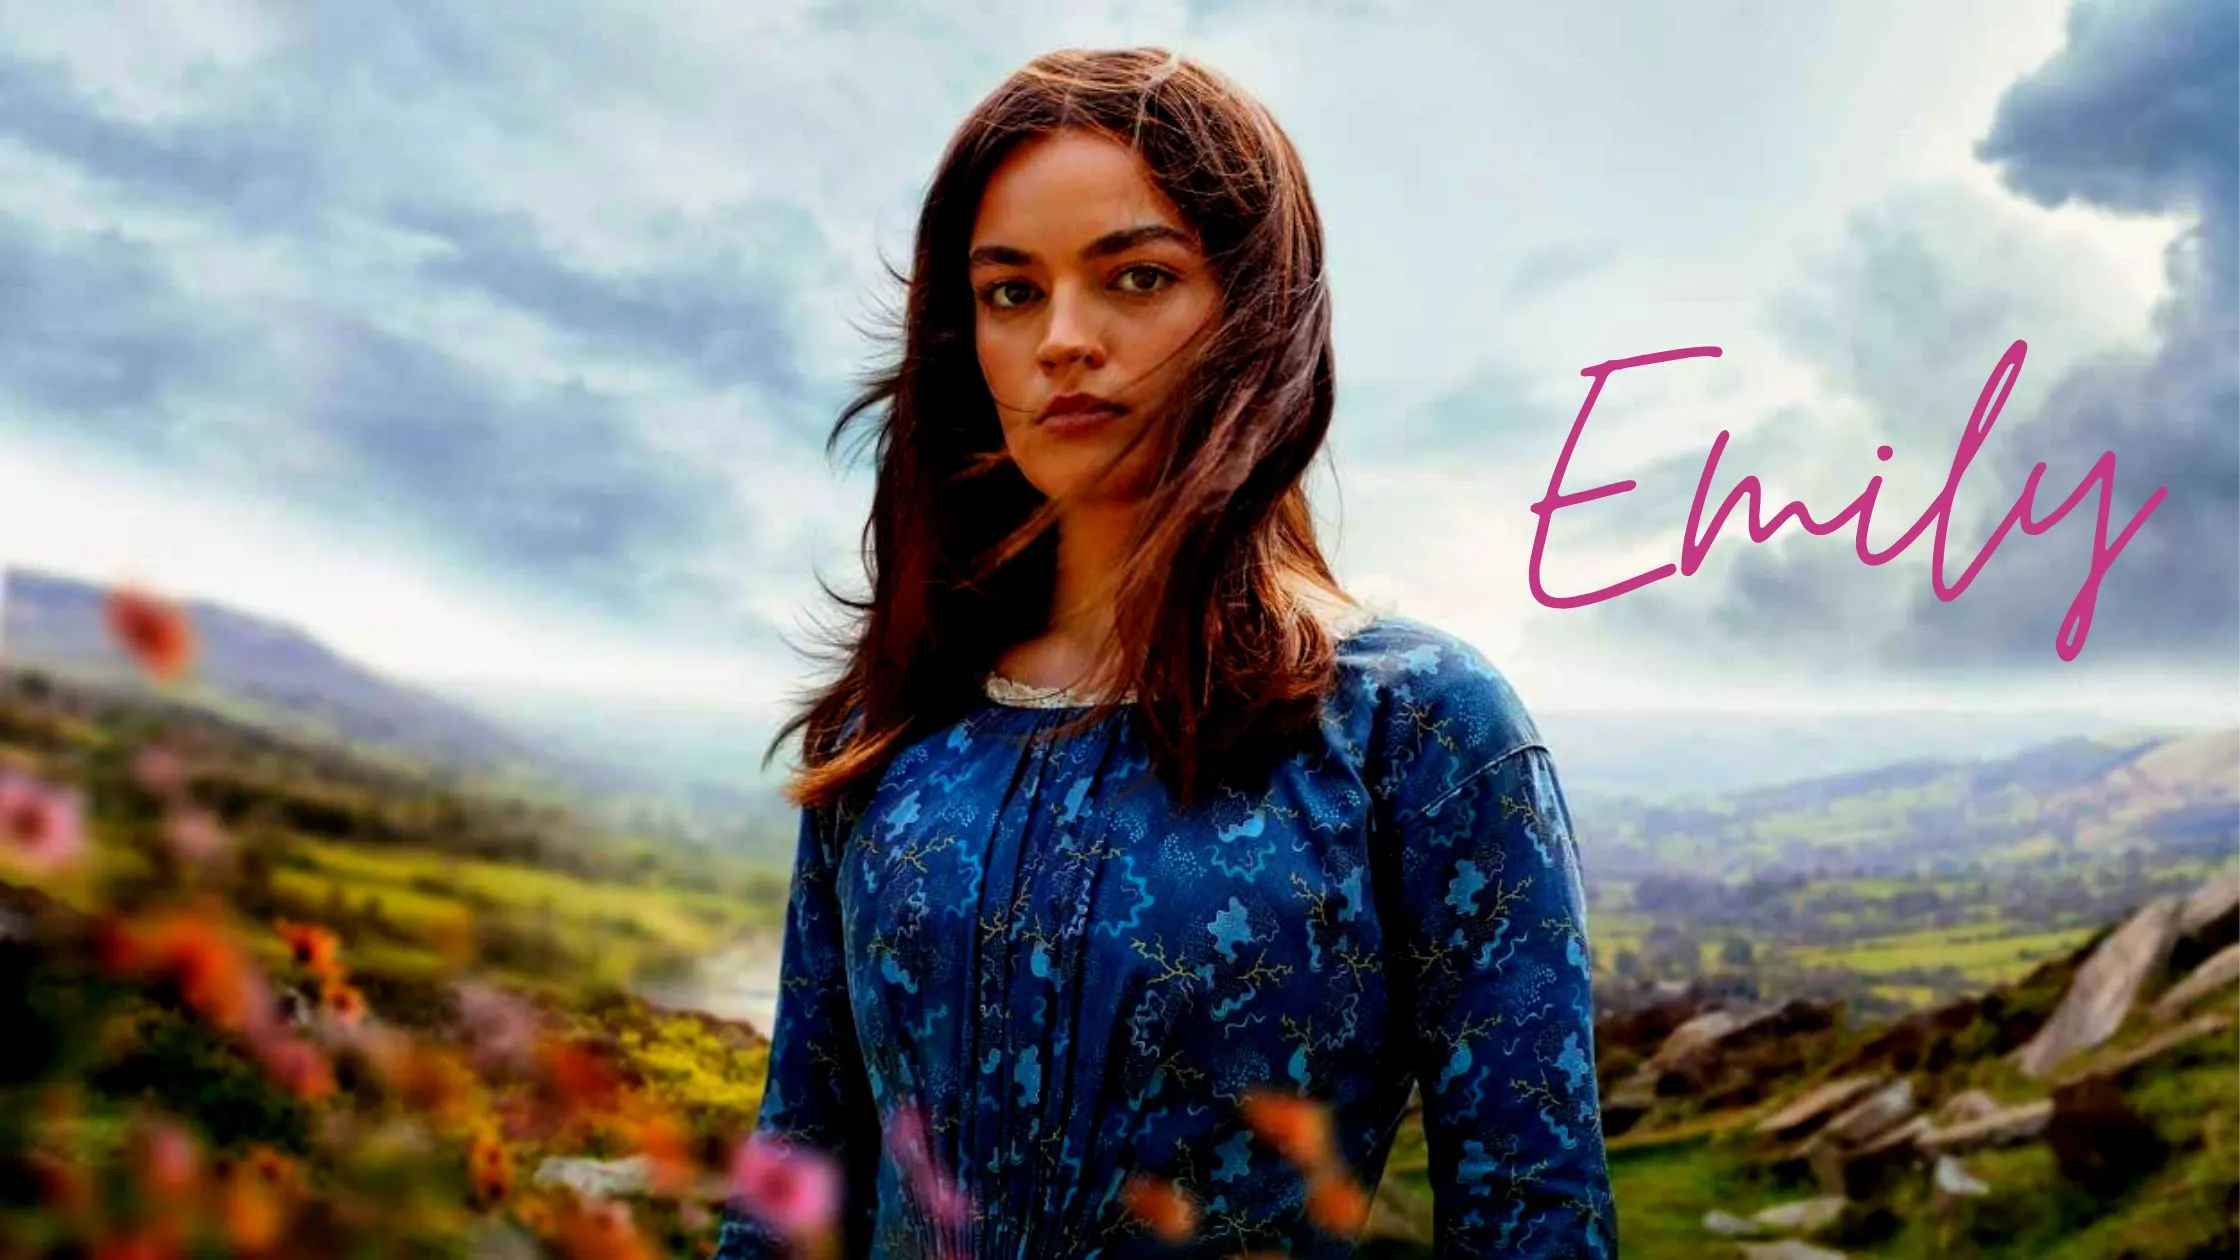 Emily Movie Checkout The Release Date, Plot, Cast, And More